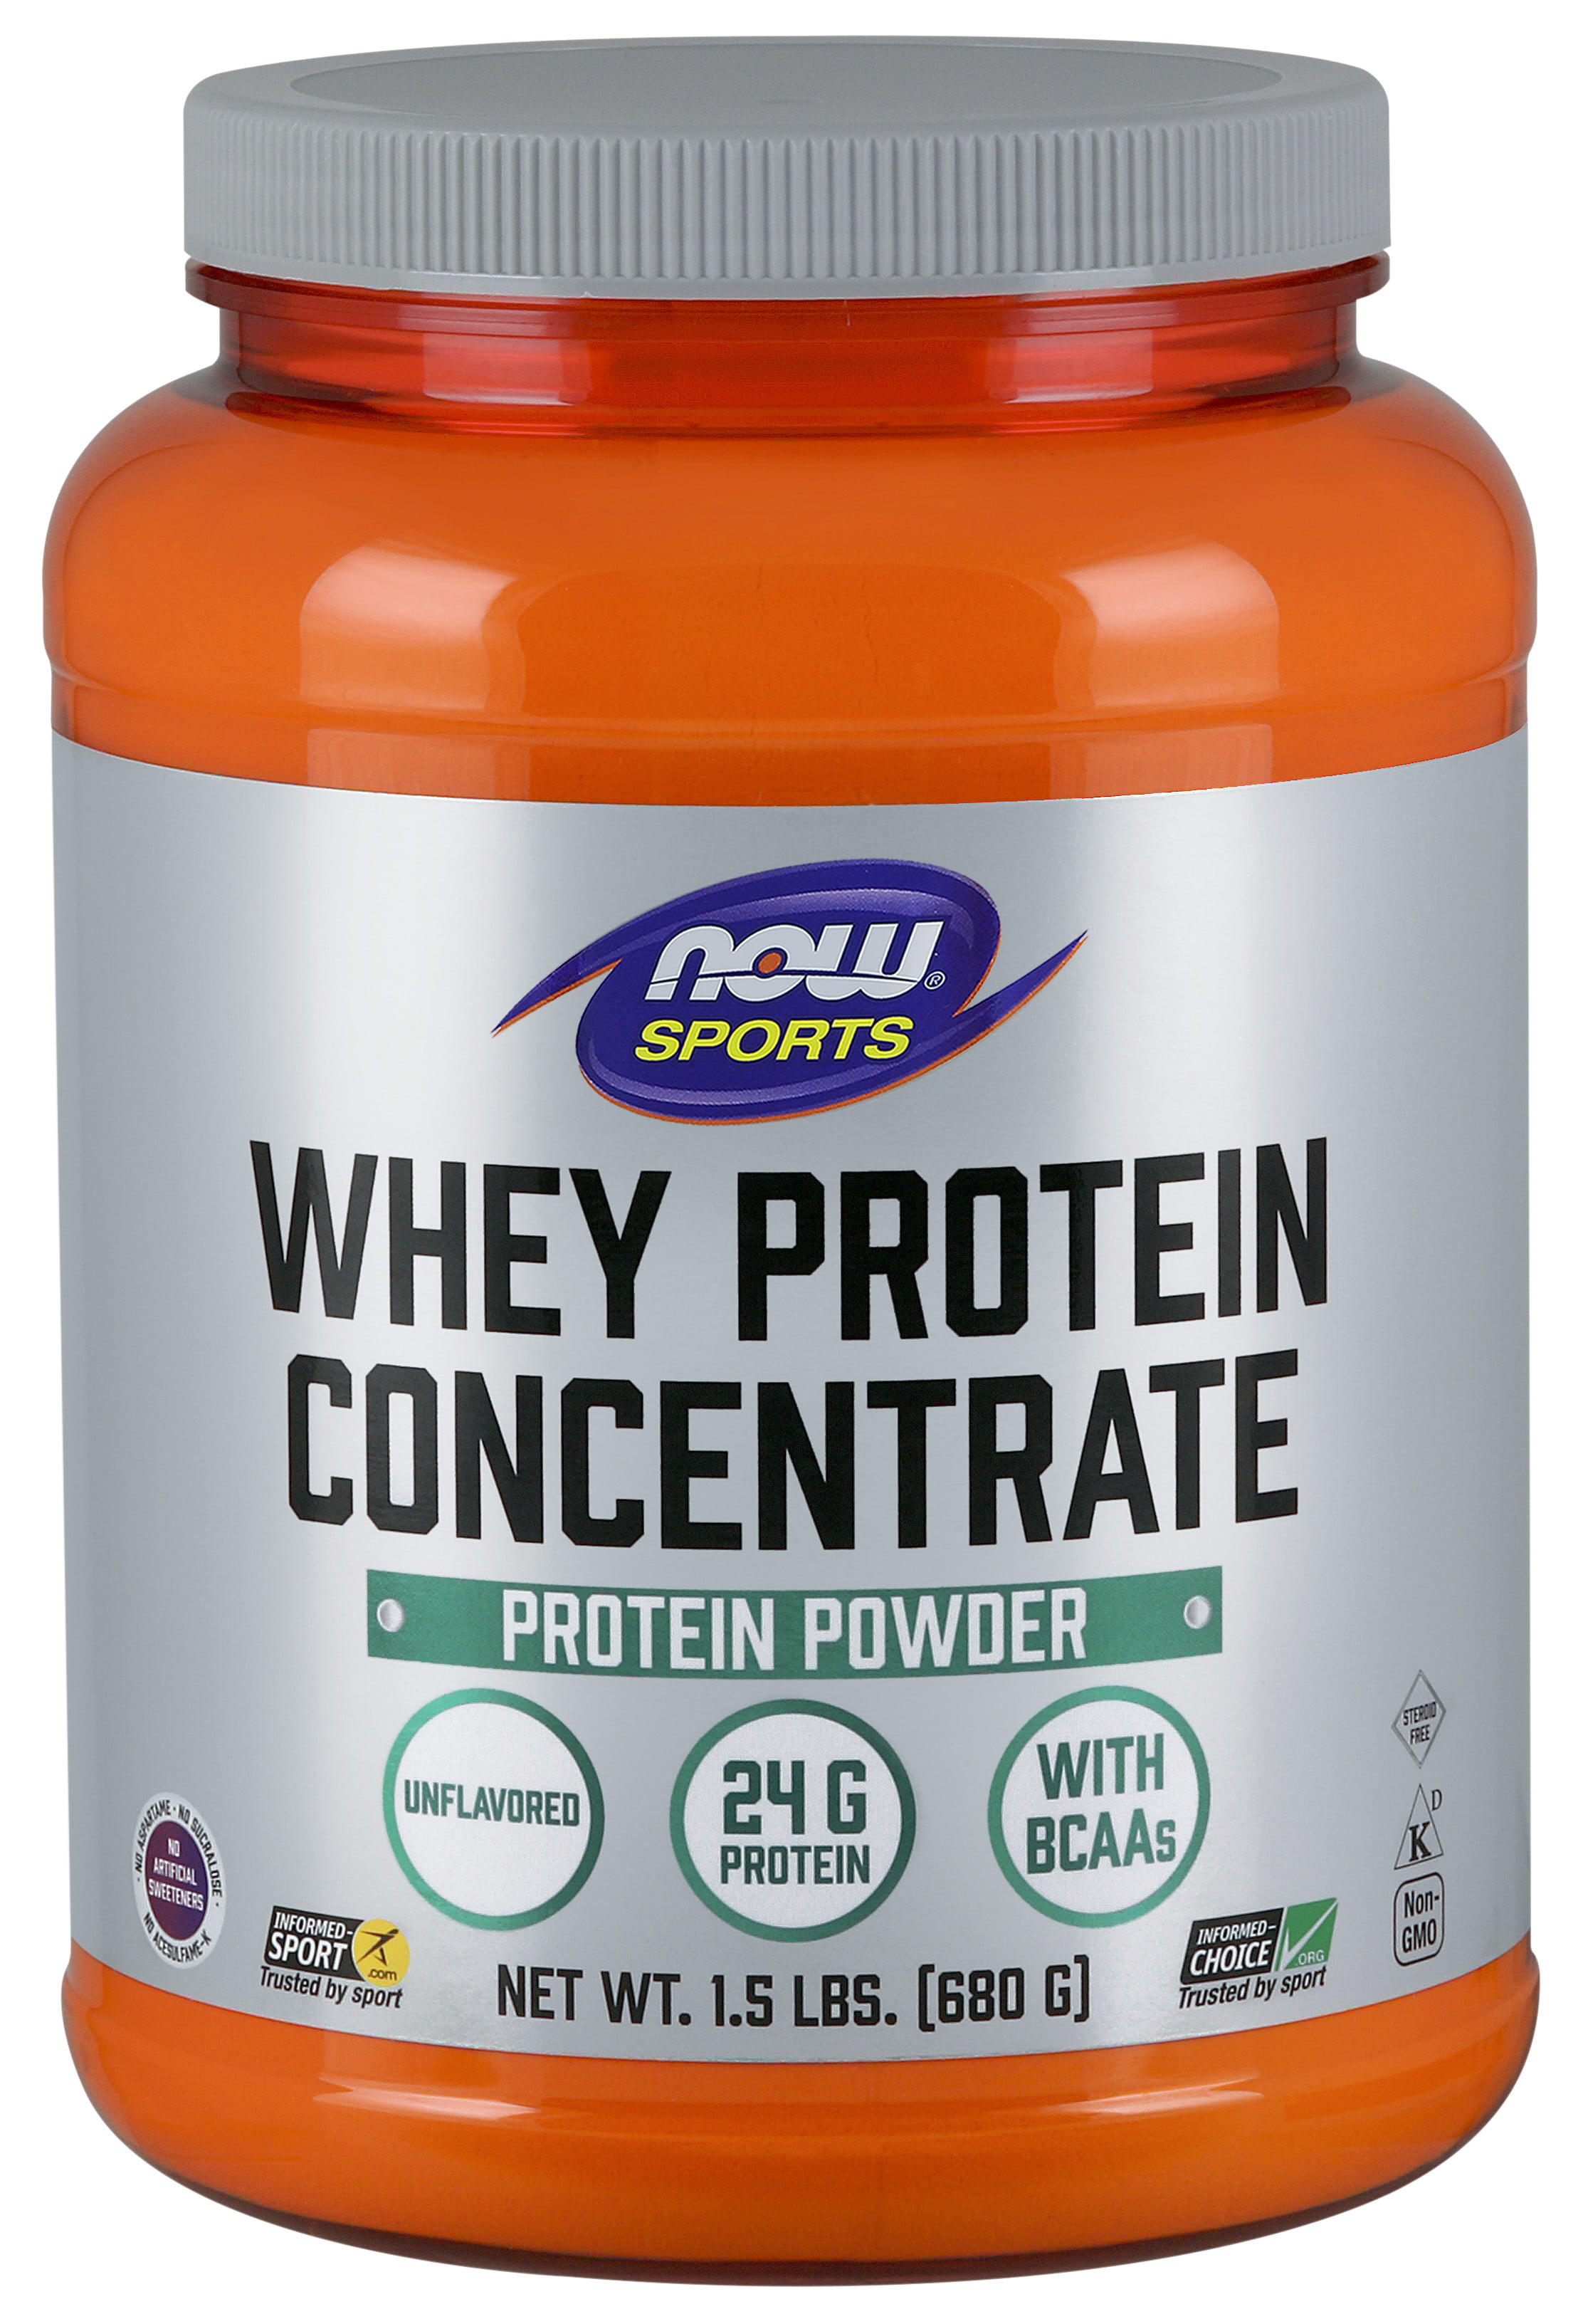 Mammoet Reiziger Nutteloos NOW Sports Nutrition, Whey Protein Concentrate, 24 g With BCAAs, Unflavored  Powder, 1.5-Pound - Walmart.com